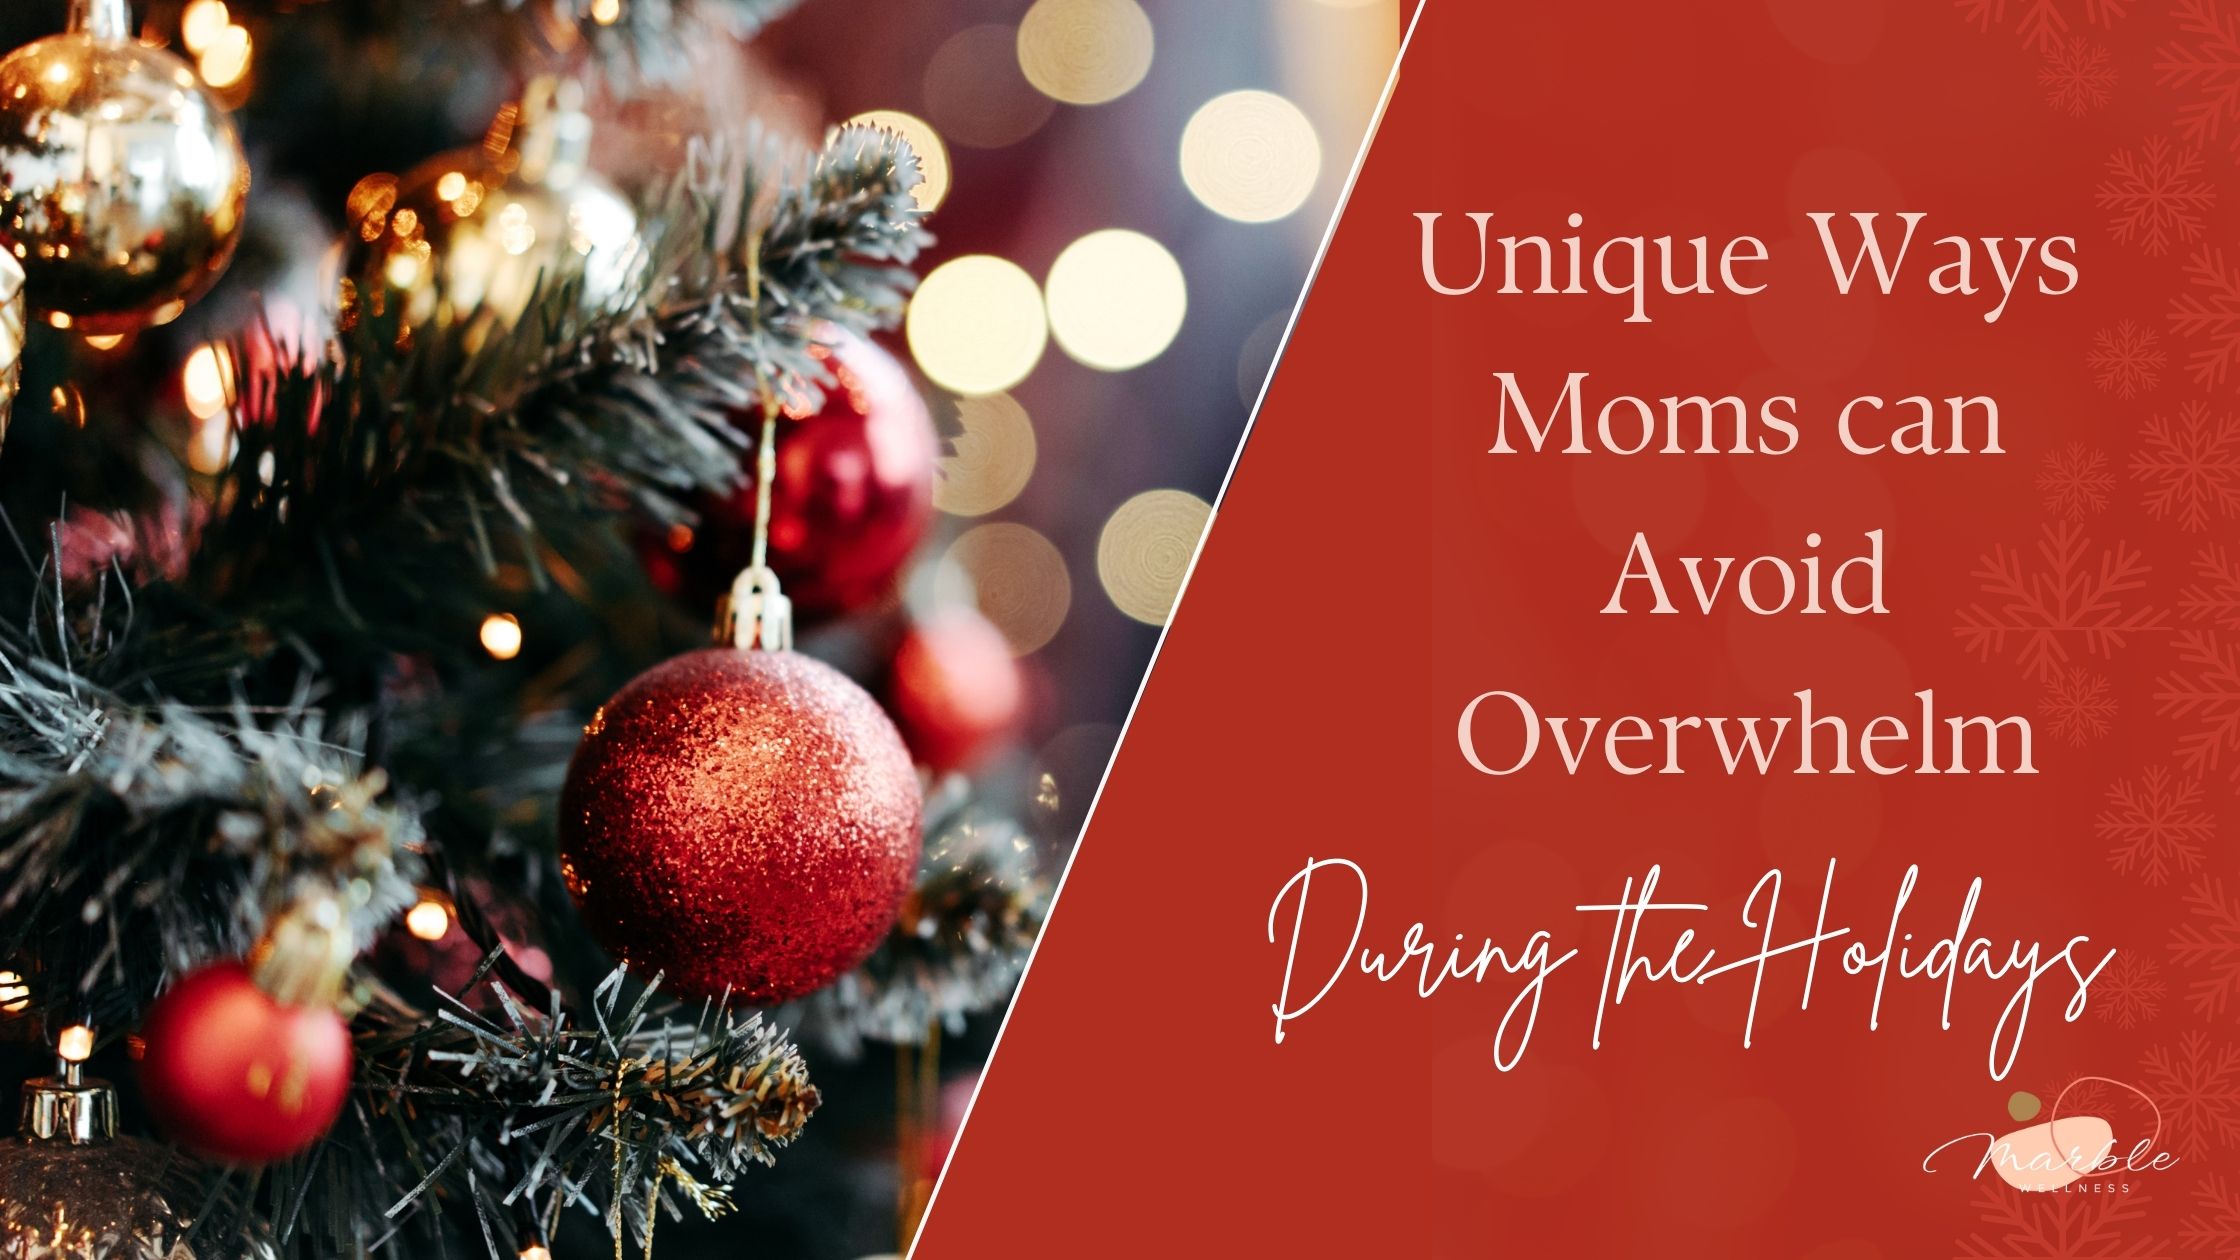 Unique Ways Moms can Avoid Overwhelm During the Holidays from a St. Louis therapist. Call today to schedule a meeting.